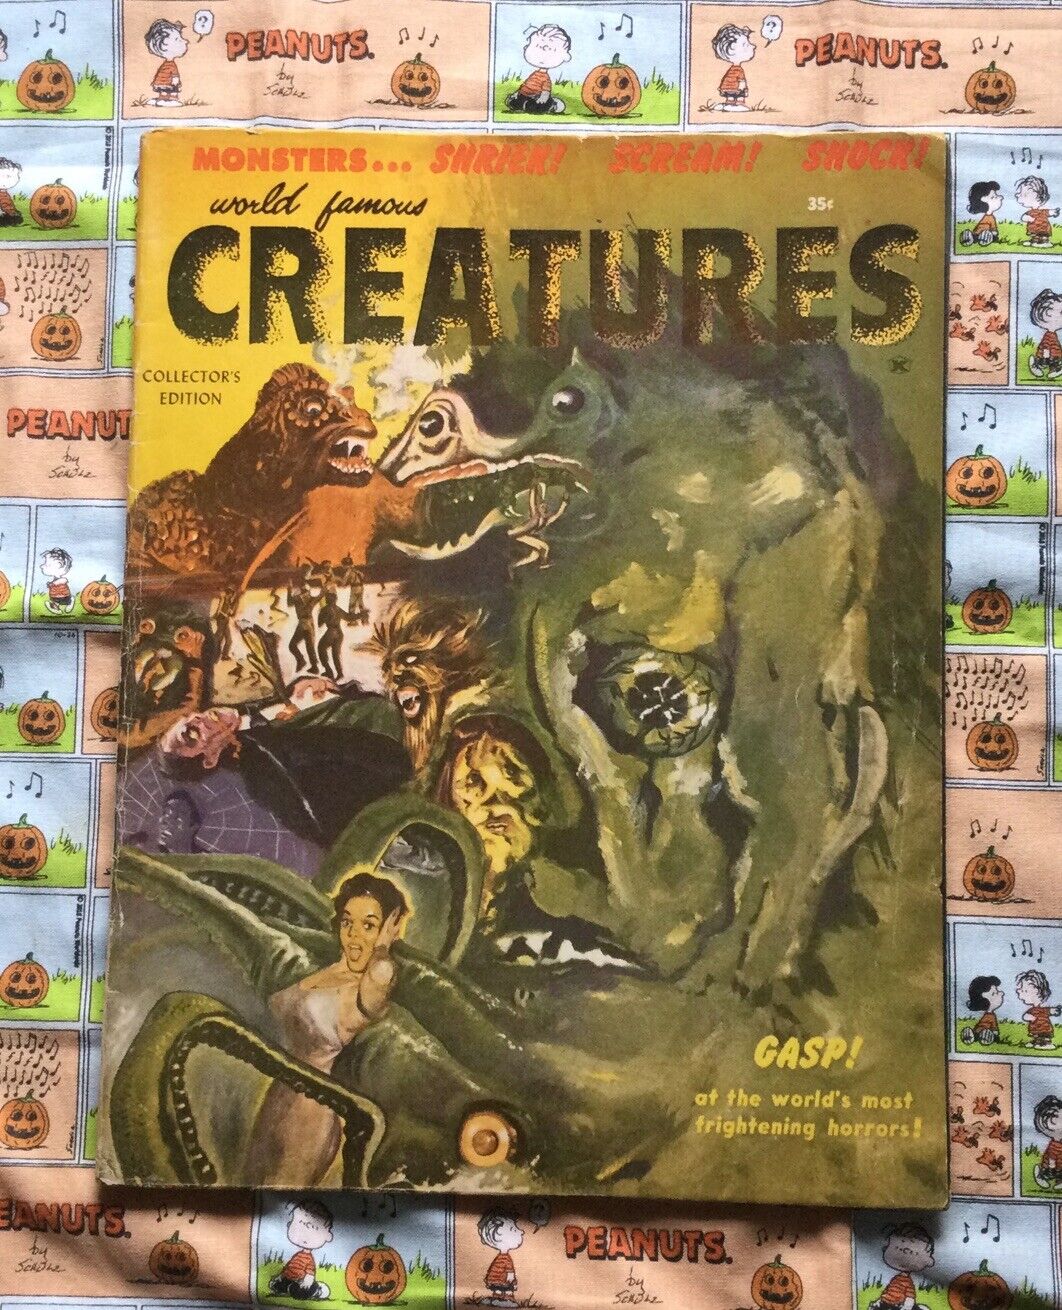 world famous creatures #1 VG Very Good Plus Condition No Tape & In Great Shape